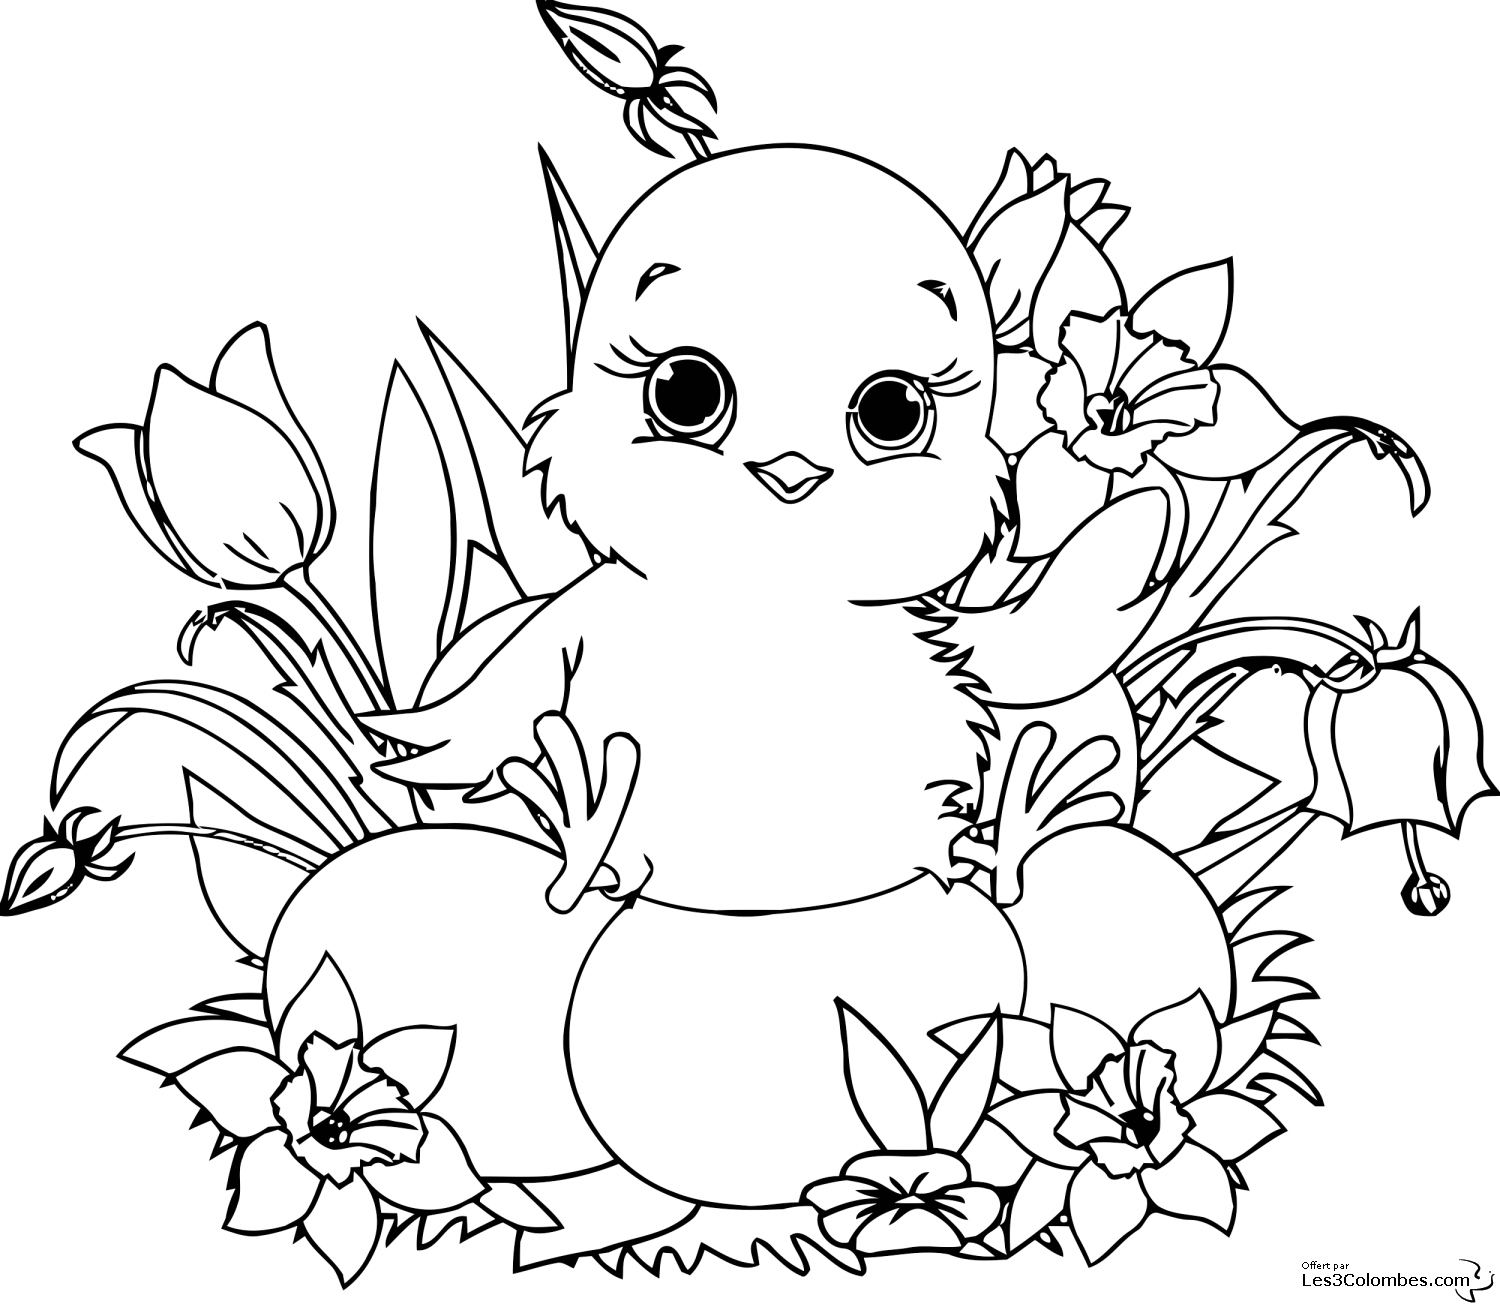 Coloring page: Chick (Animals) #15319 - Printable coloring pages